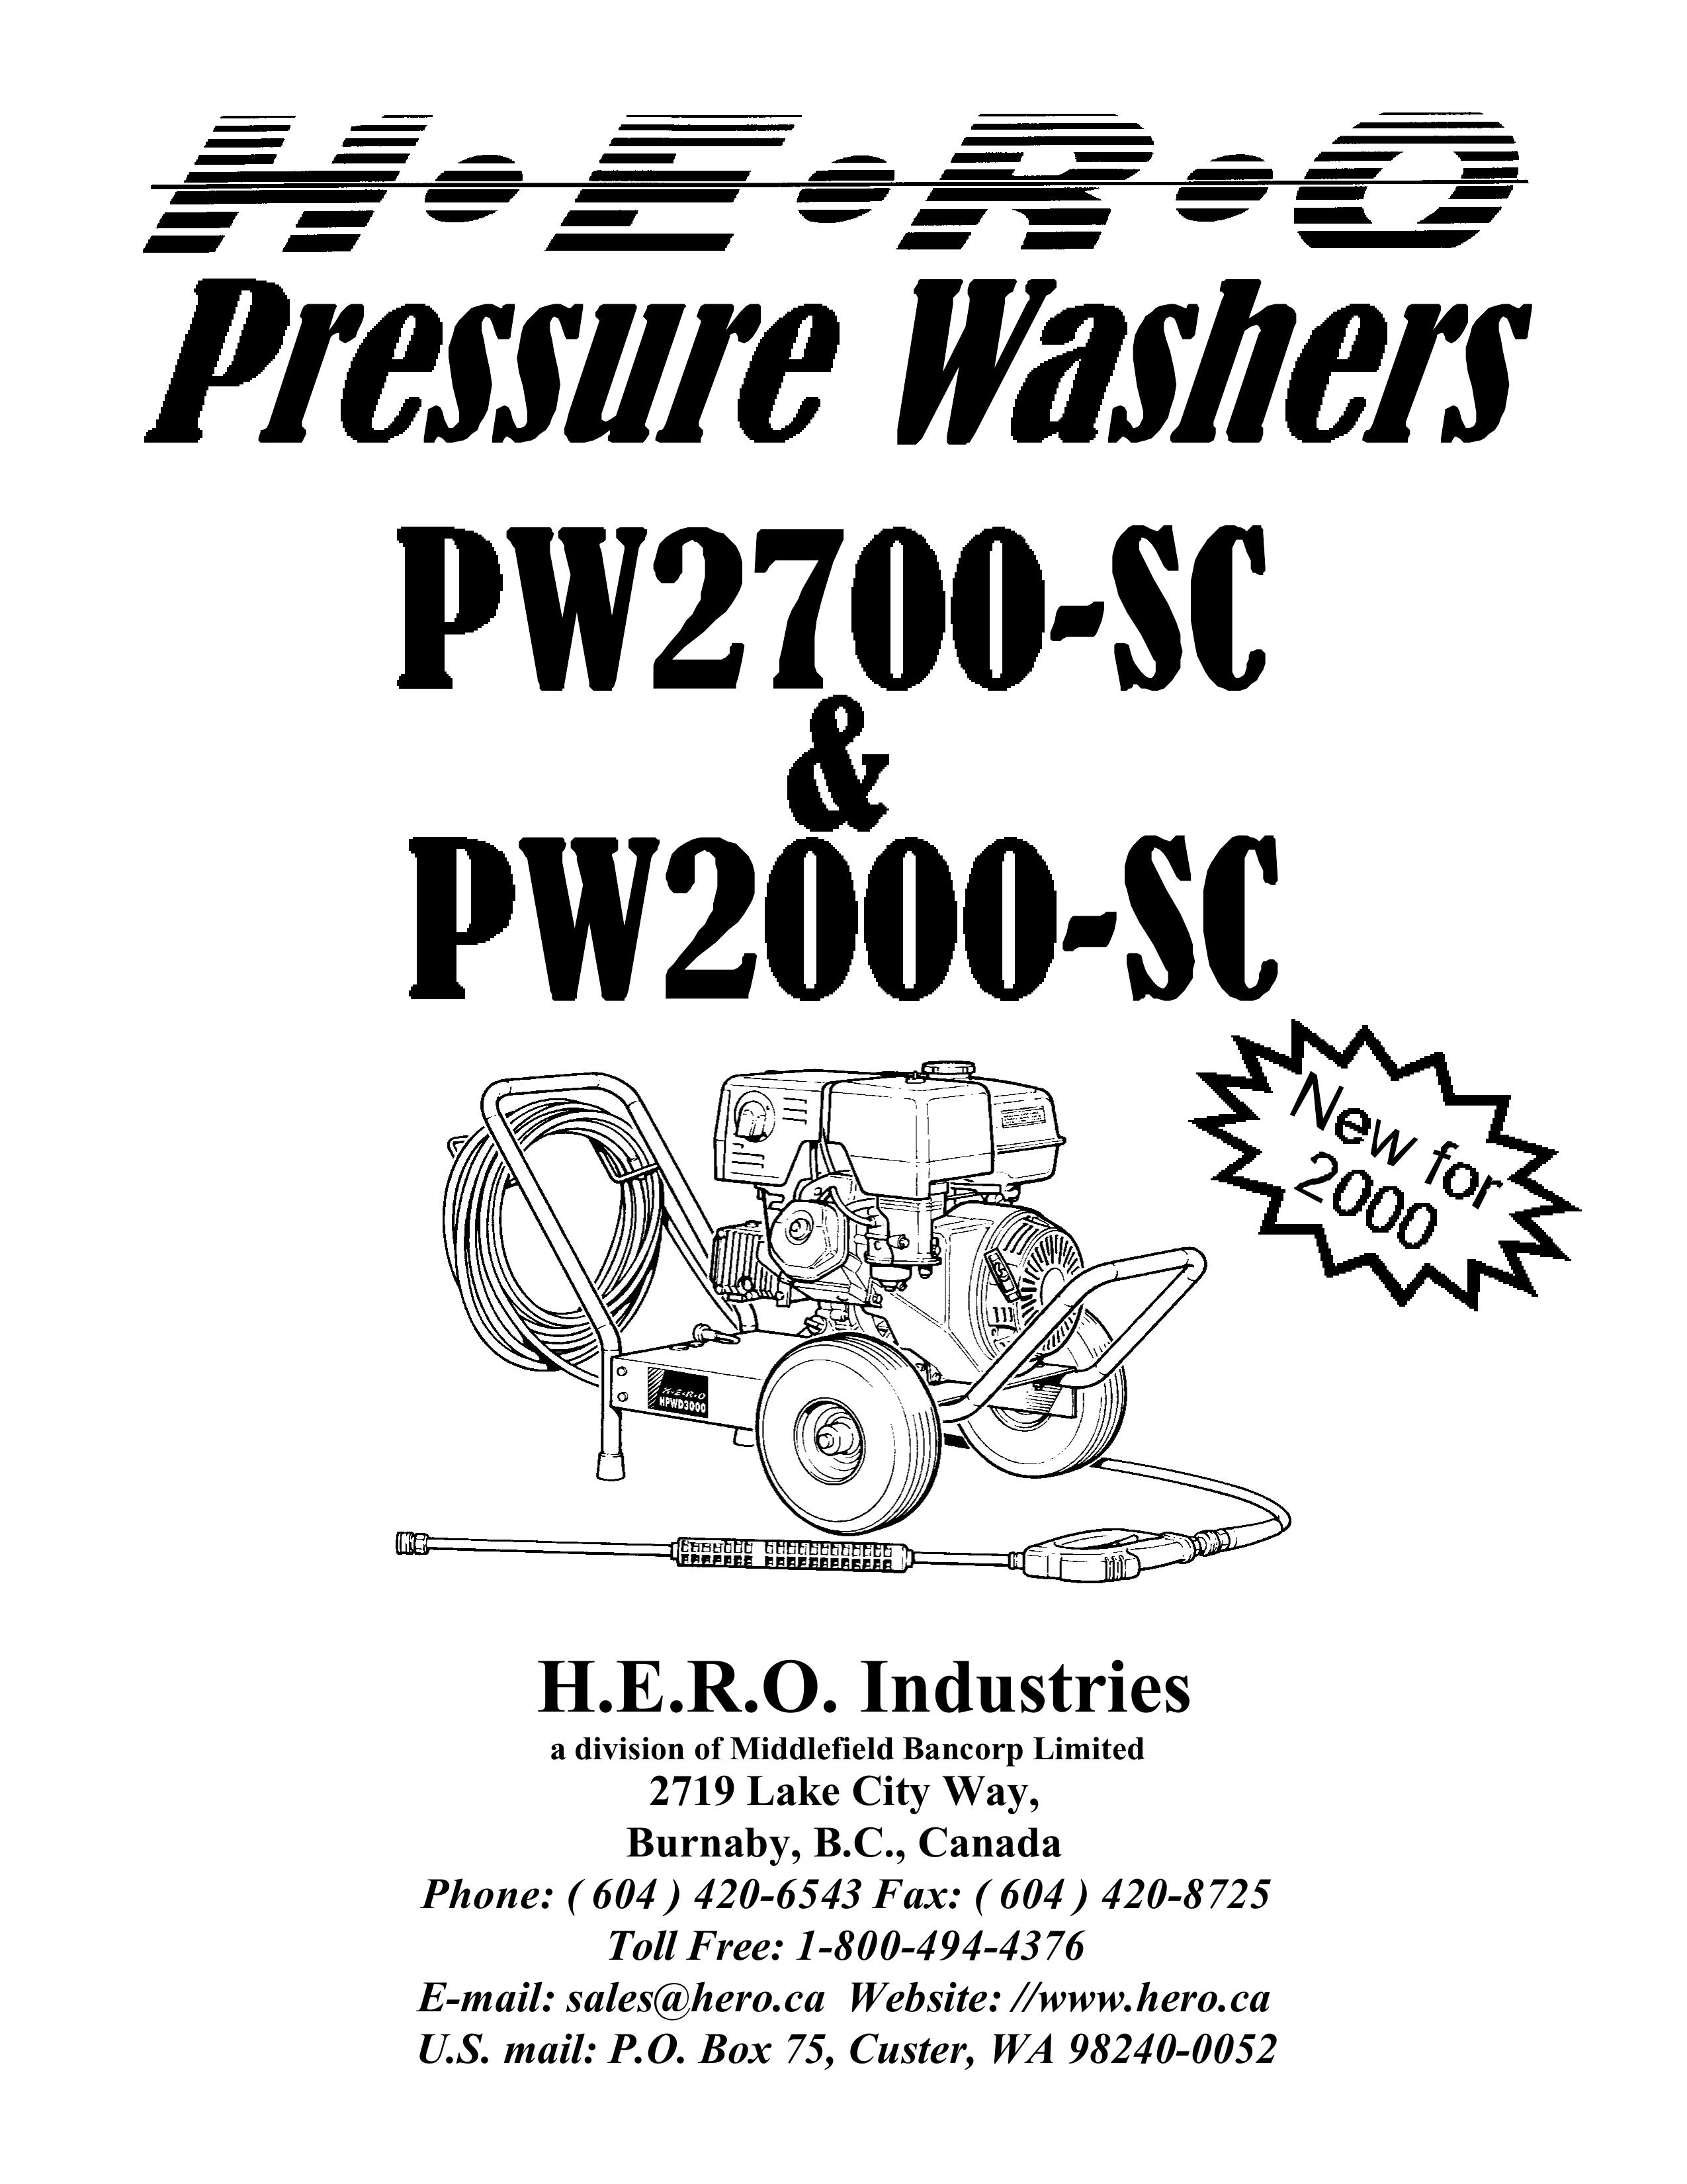 I.C.T.C. Holdings Corporation PW2700-SC Pressure Washer User Manual